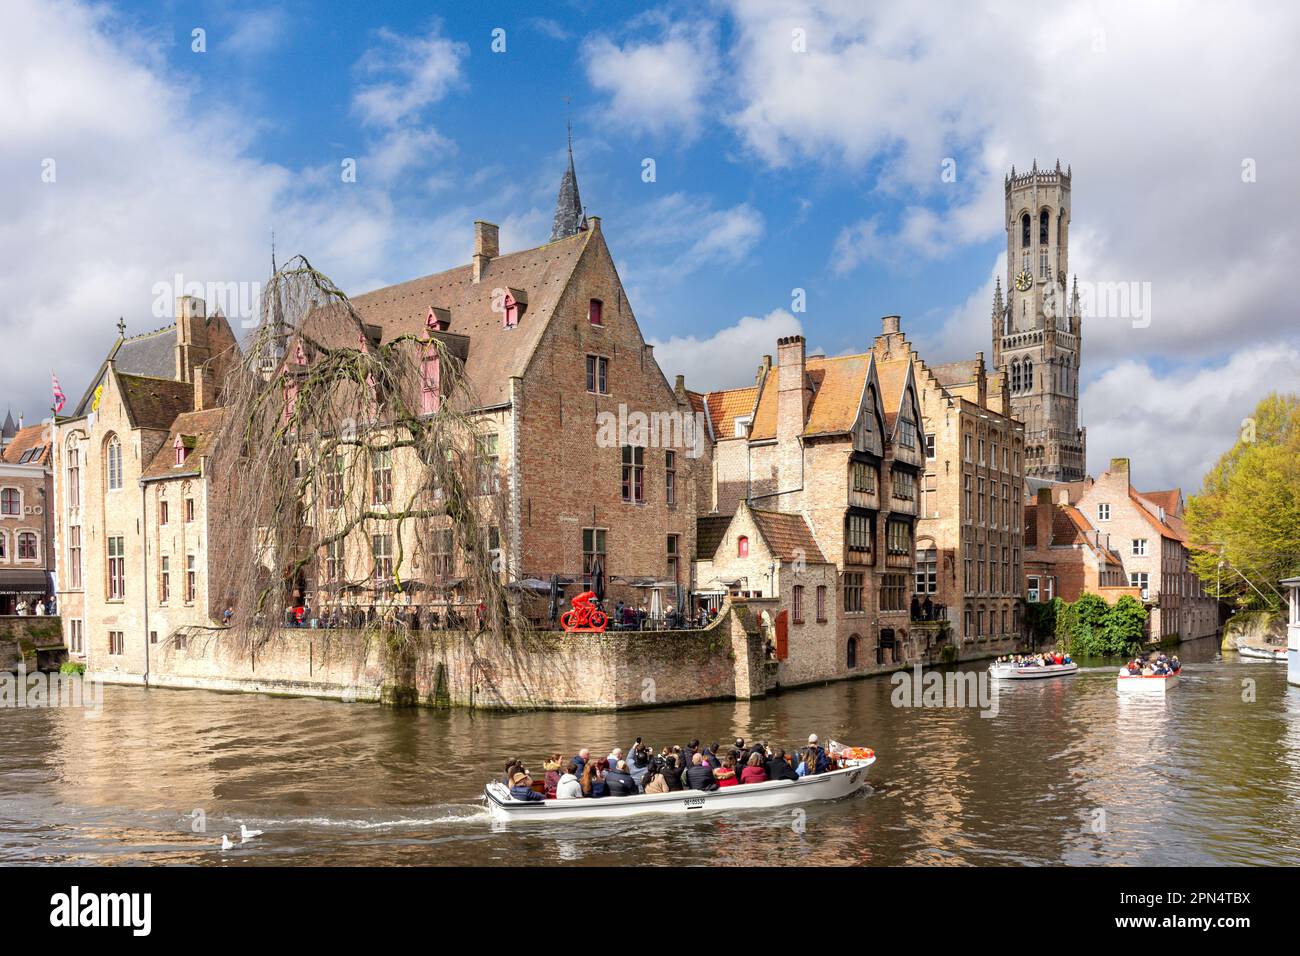 Sightseeing canal boats at The Rozenhoedkaai Canal, Bruges (Brugge), West Flanders Province, Kingdom of Belgium. Stock Photo